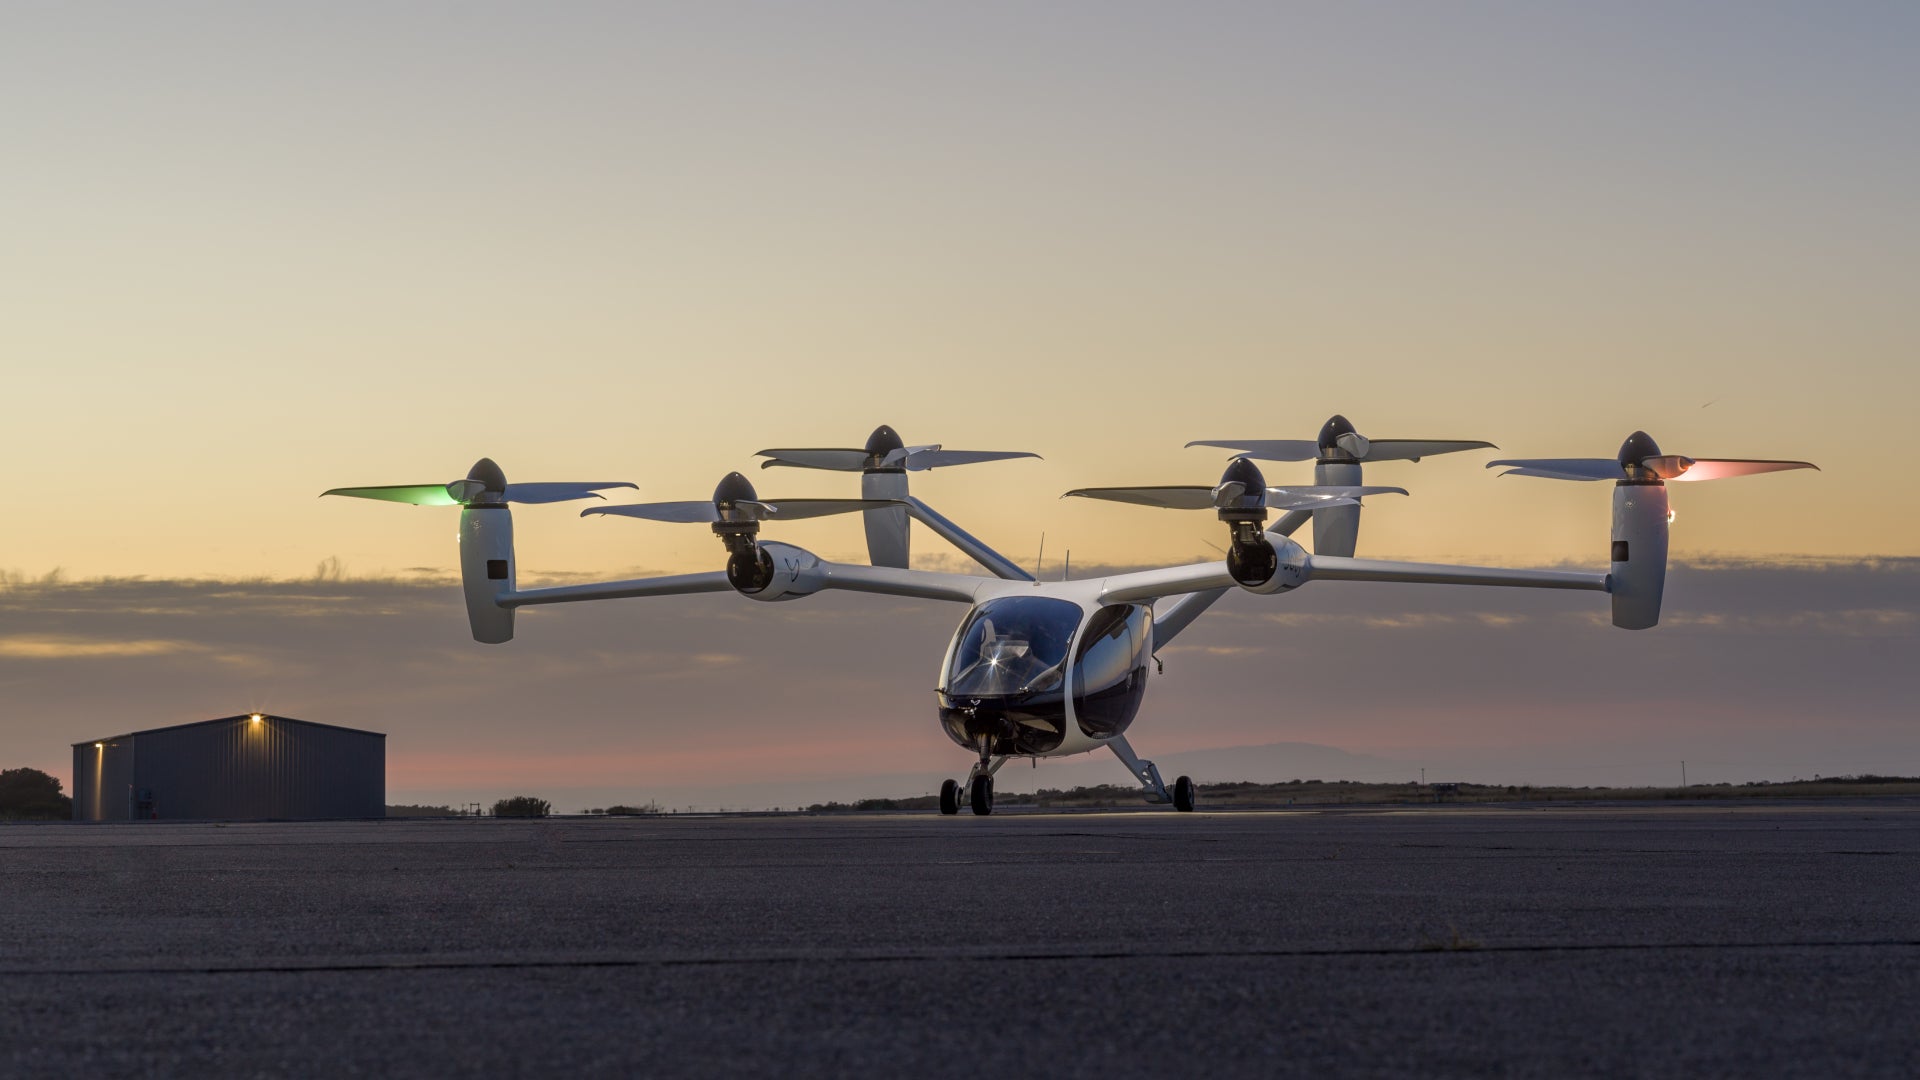 Air Taxi Manufacturers Joby, Lilium Take More Baby Steps Toward Certification